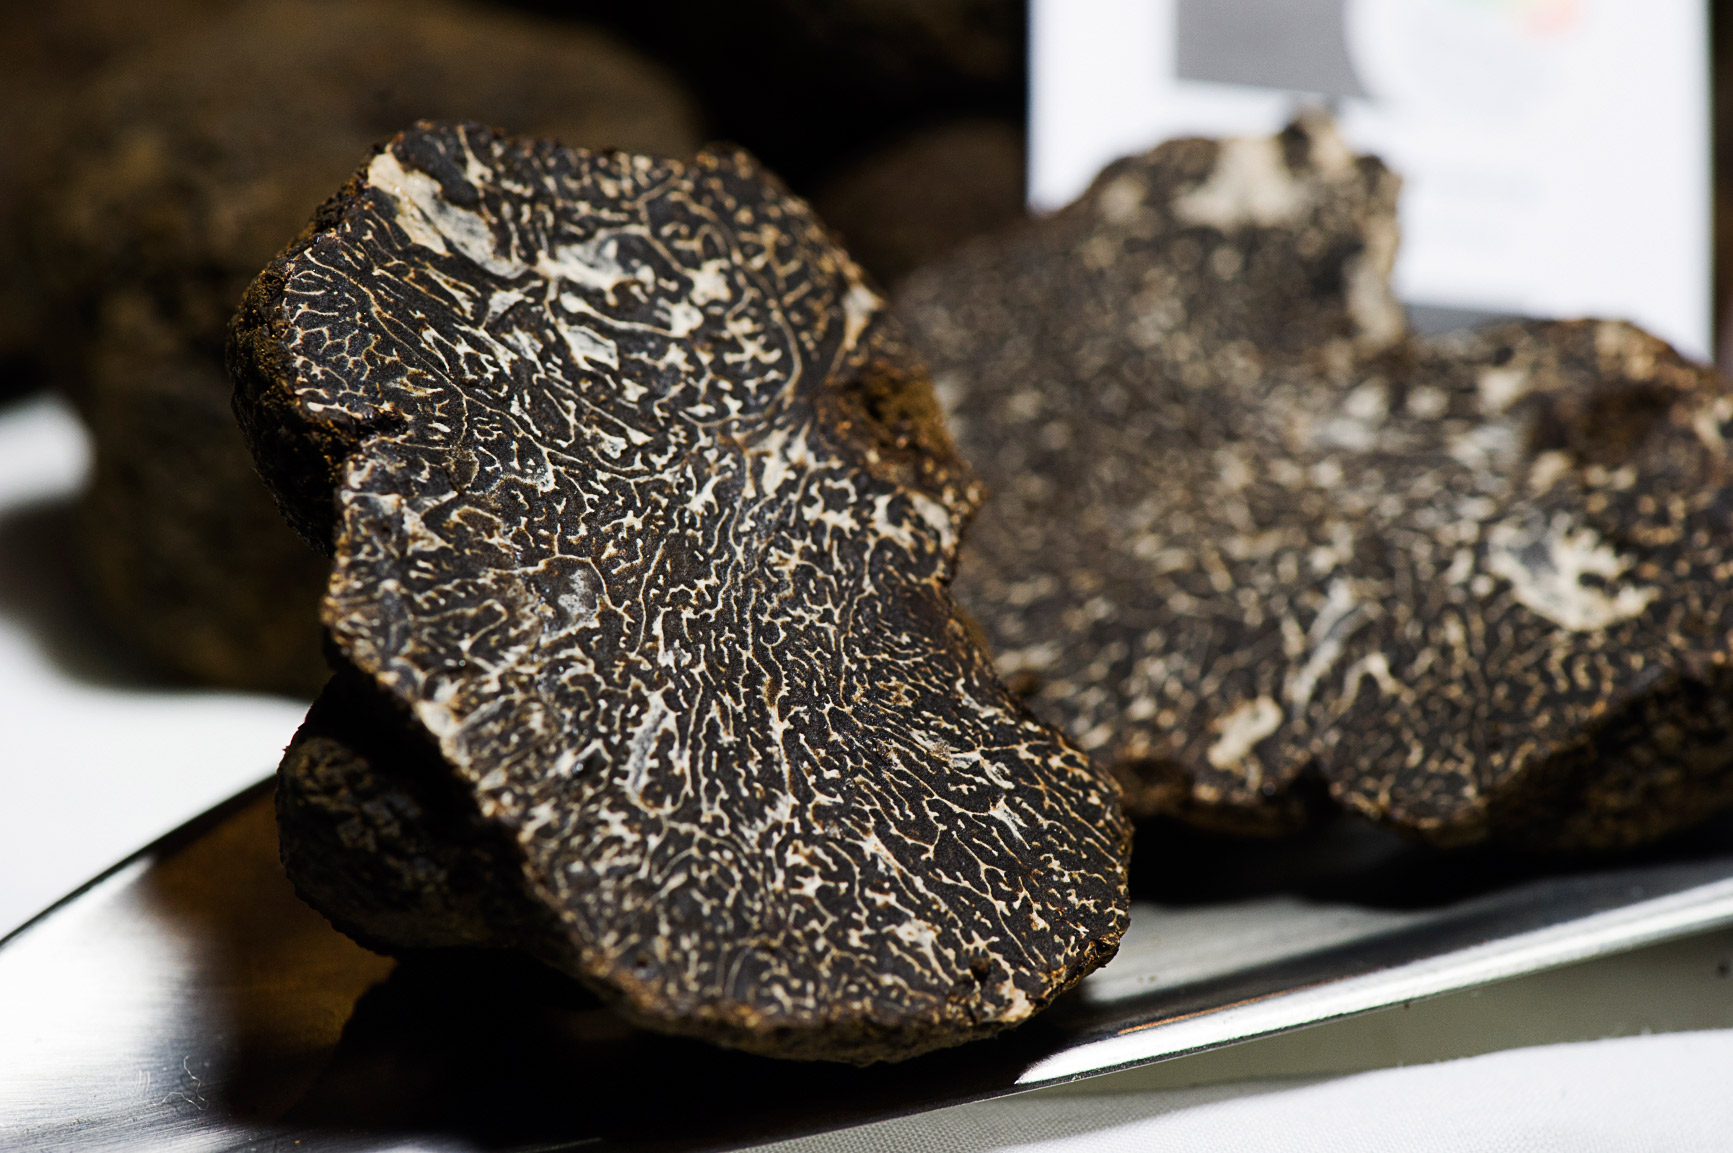 Exhibition of the Black Truffle of the Maestrat